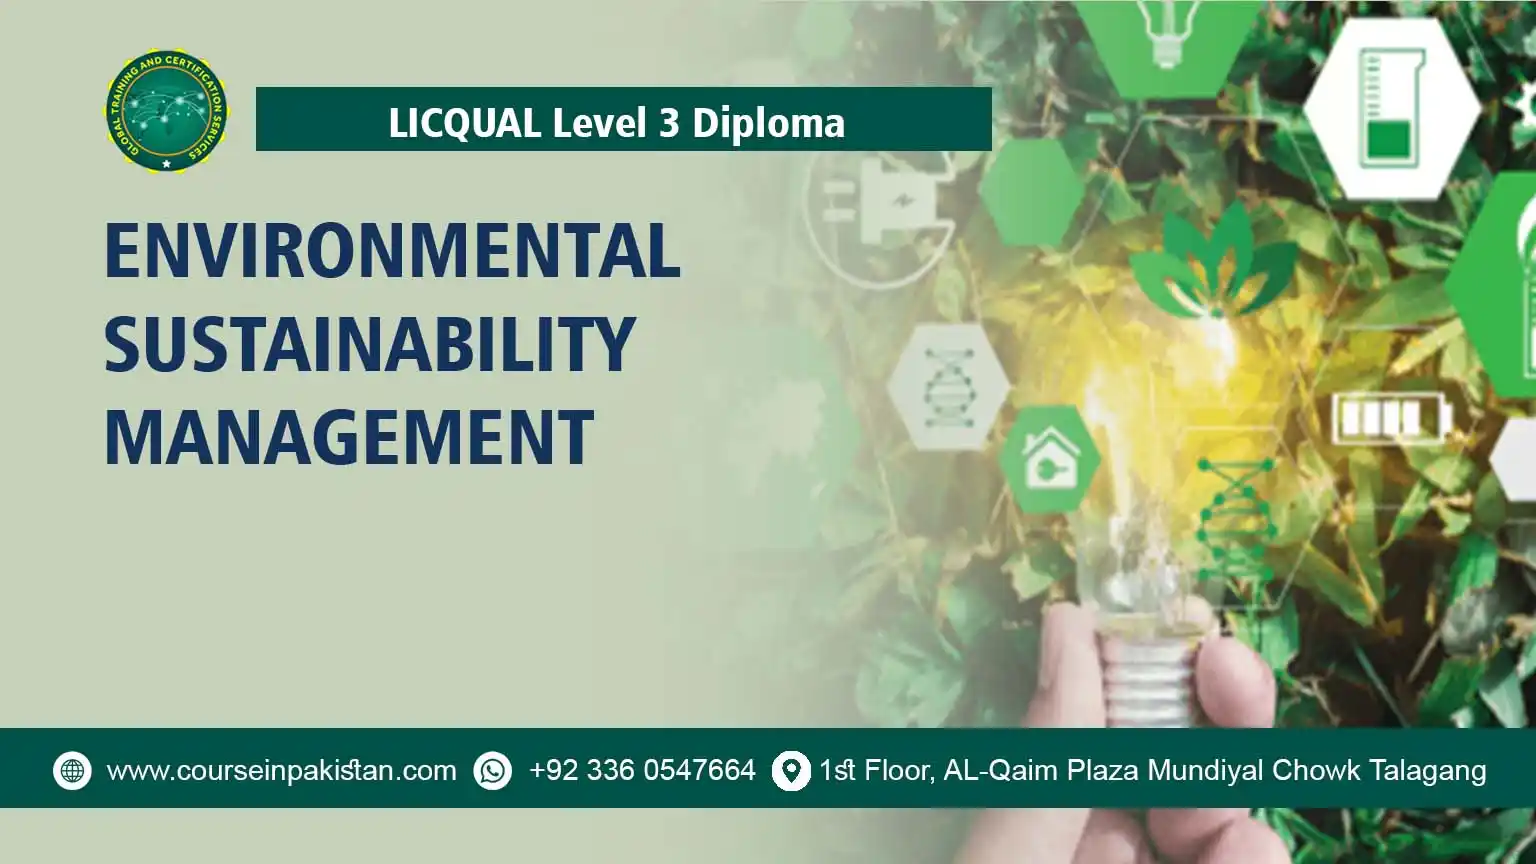 Level 3 Diploma in Environmental Sustainability Management